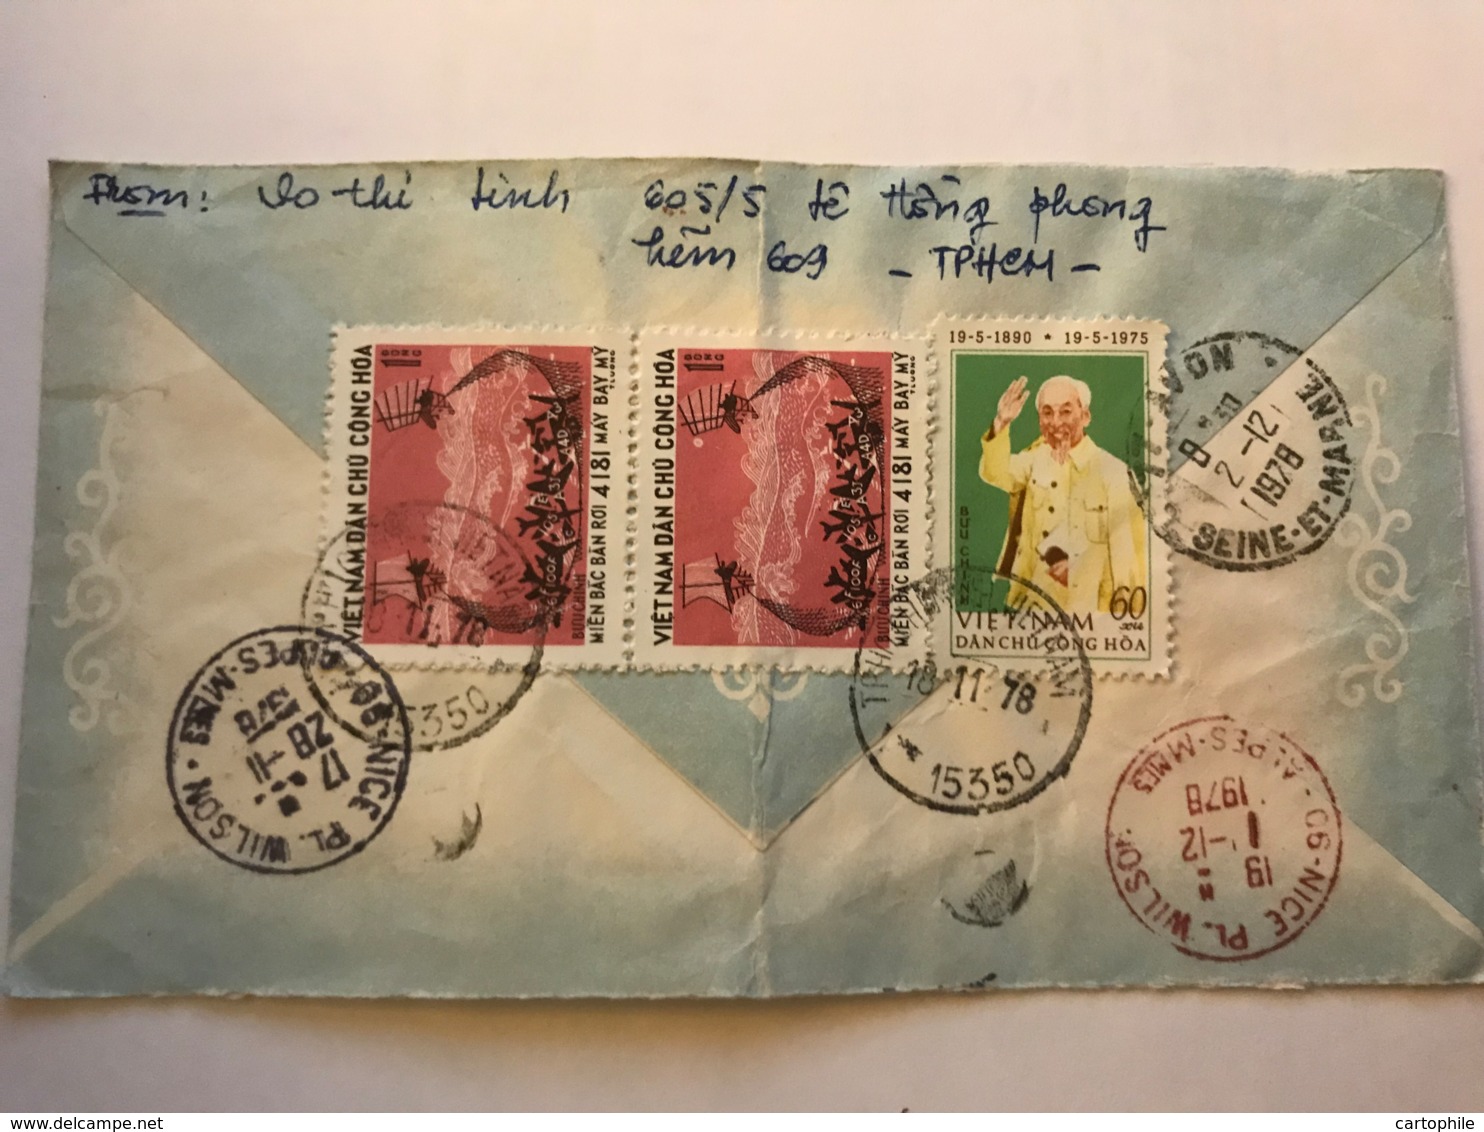 SOUTH VIET NAM - Registerd Letters 1978 From ? - Air Mail To France - Vietnam